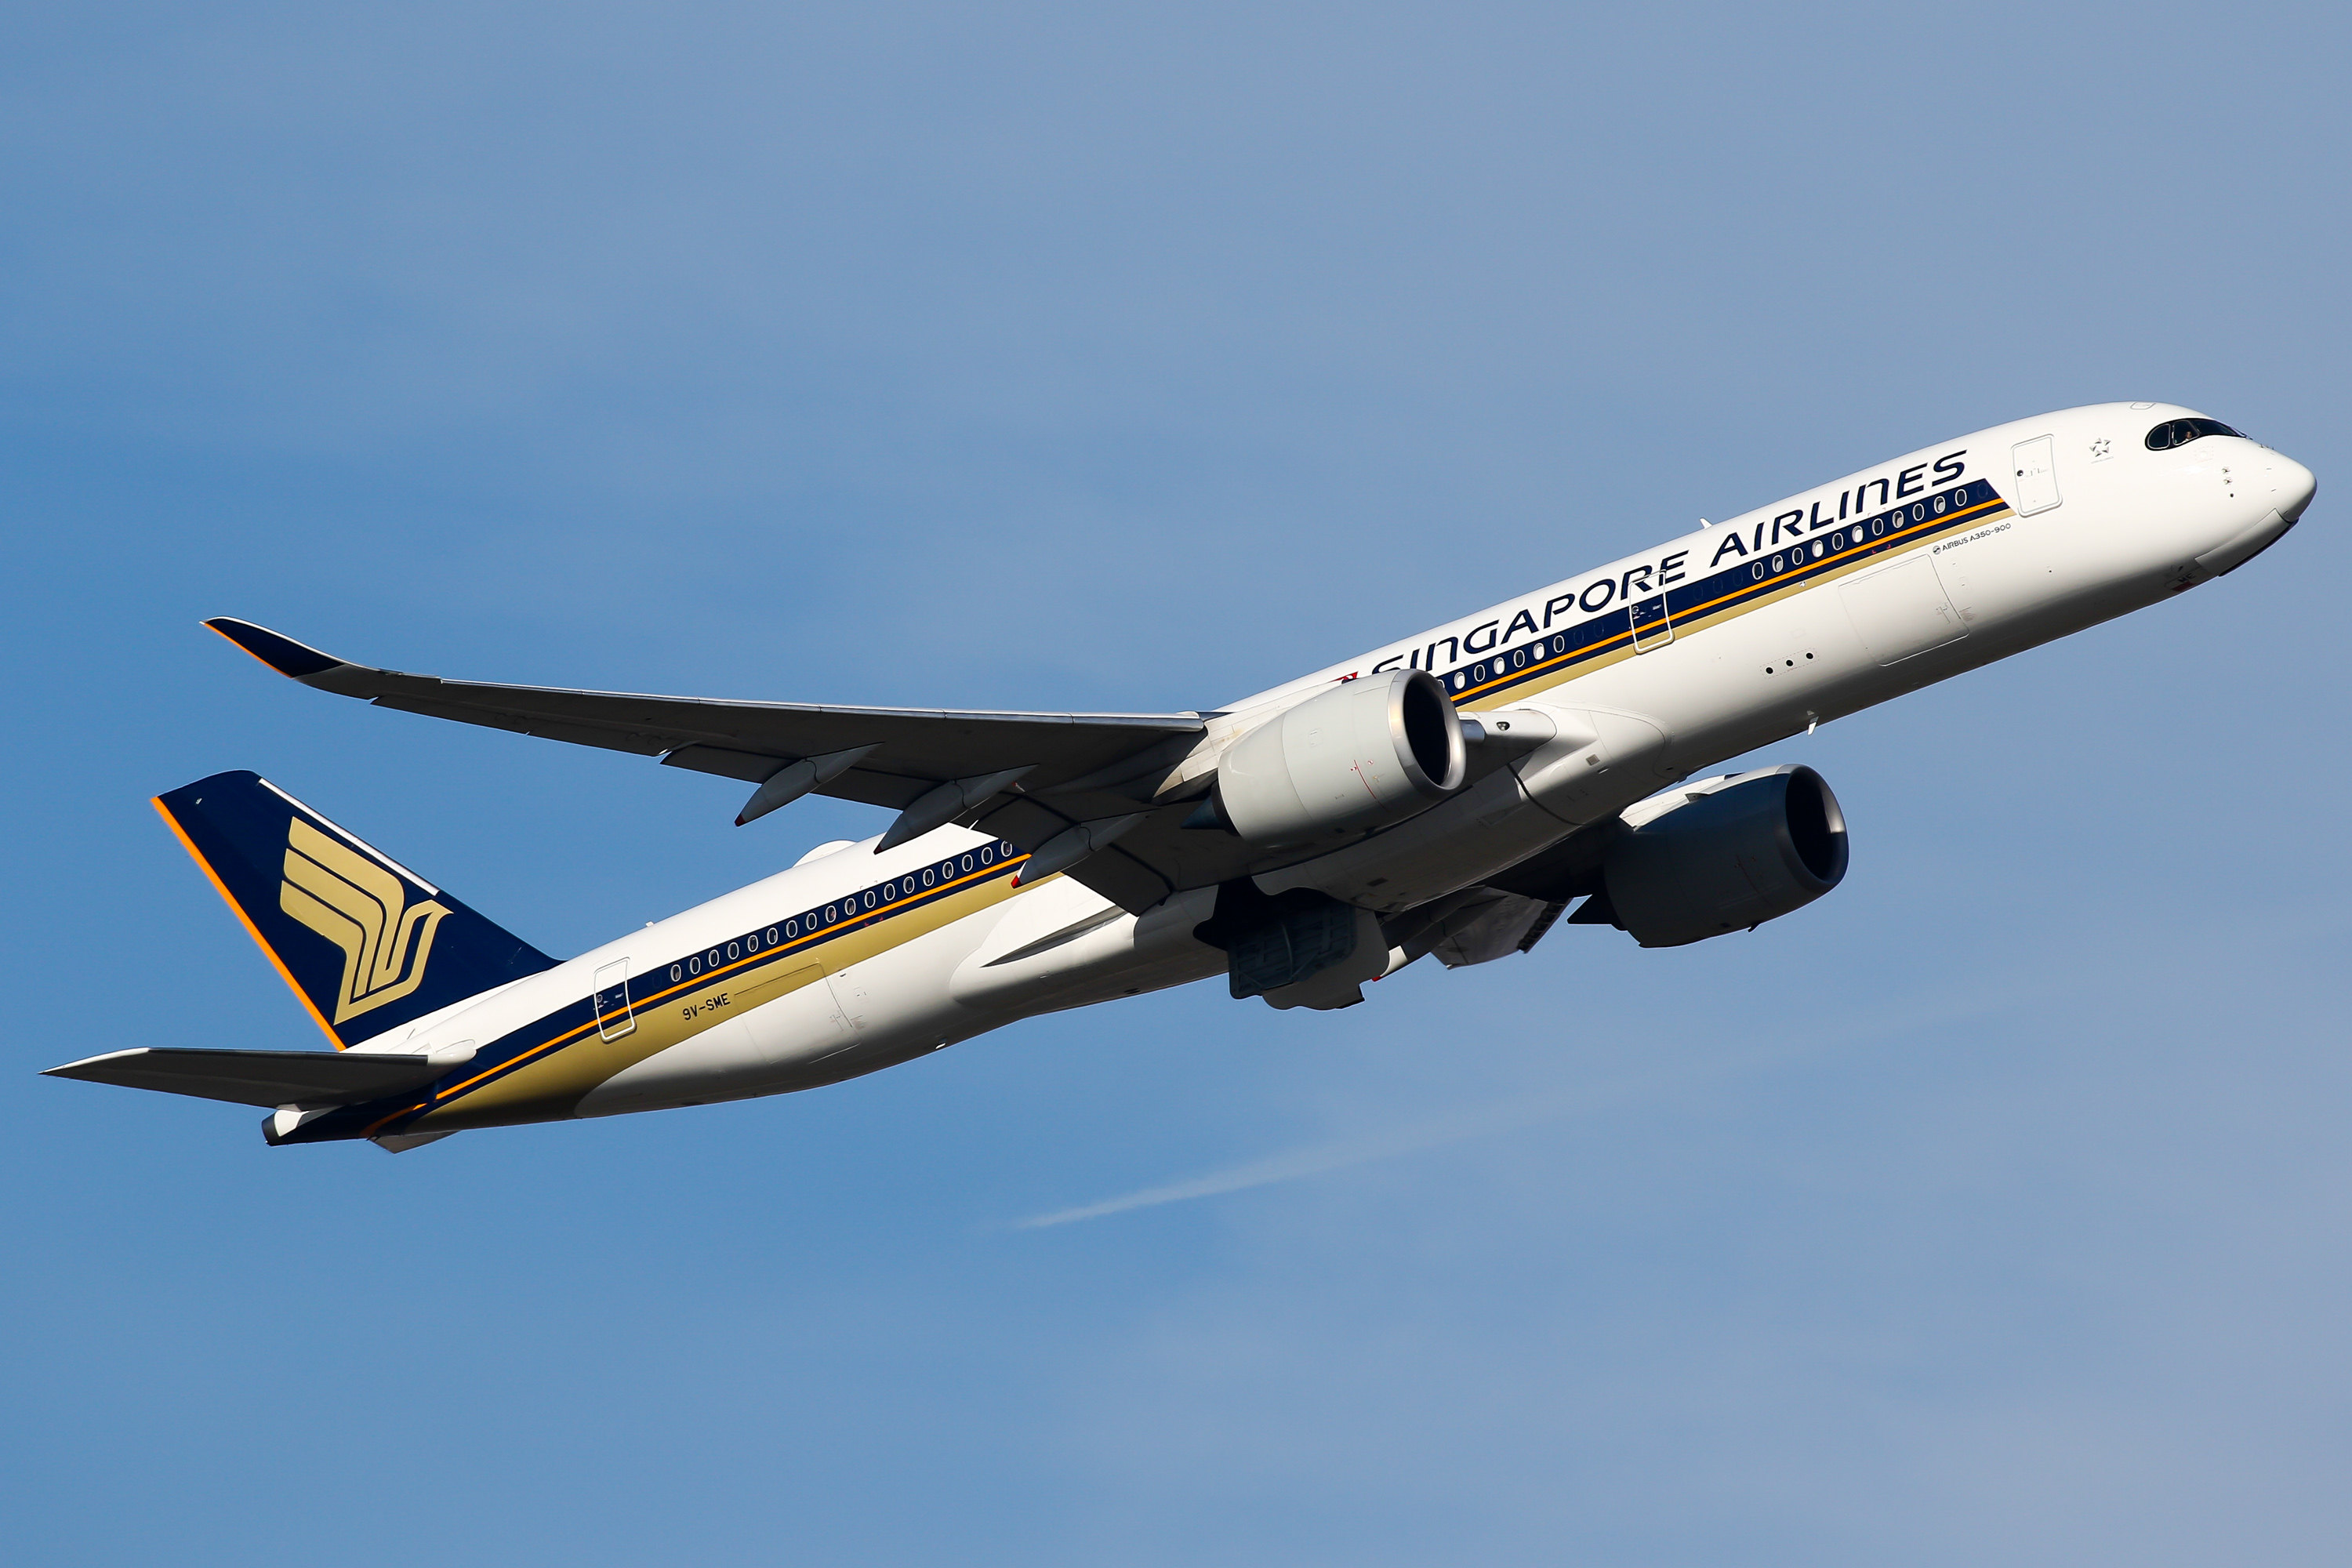 Singapore Airlines is being sued by a former flight attendant over unsafe work conditions. Photo: Getty Images